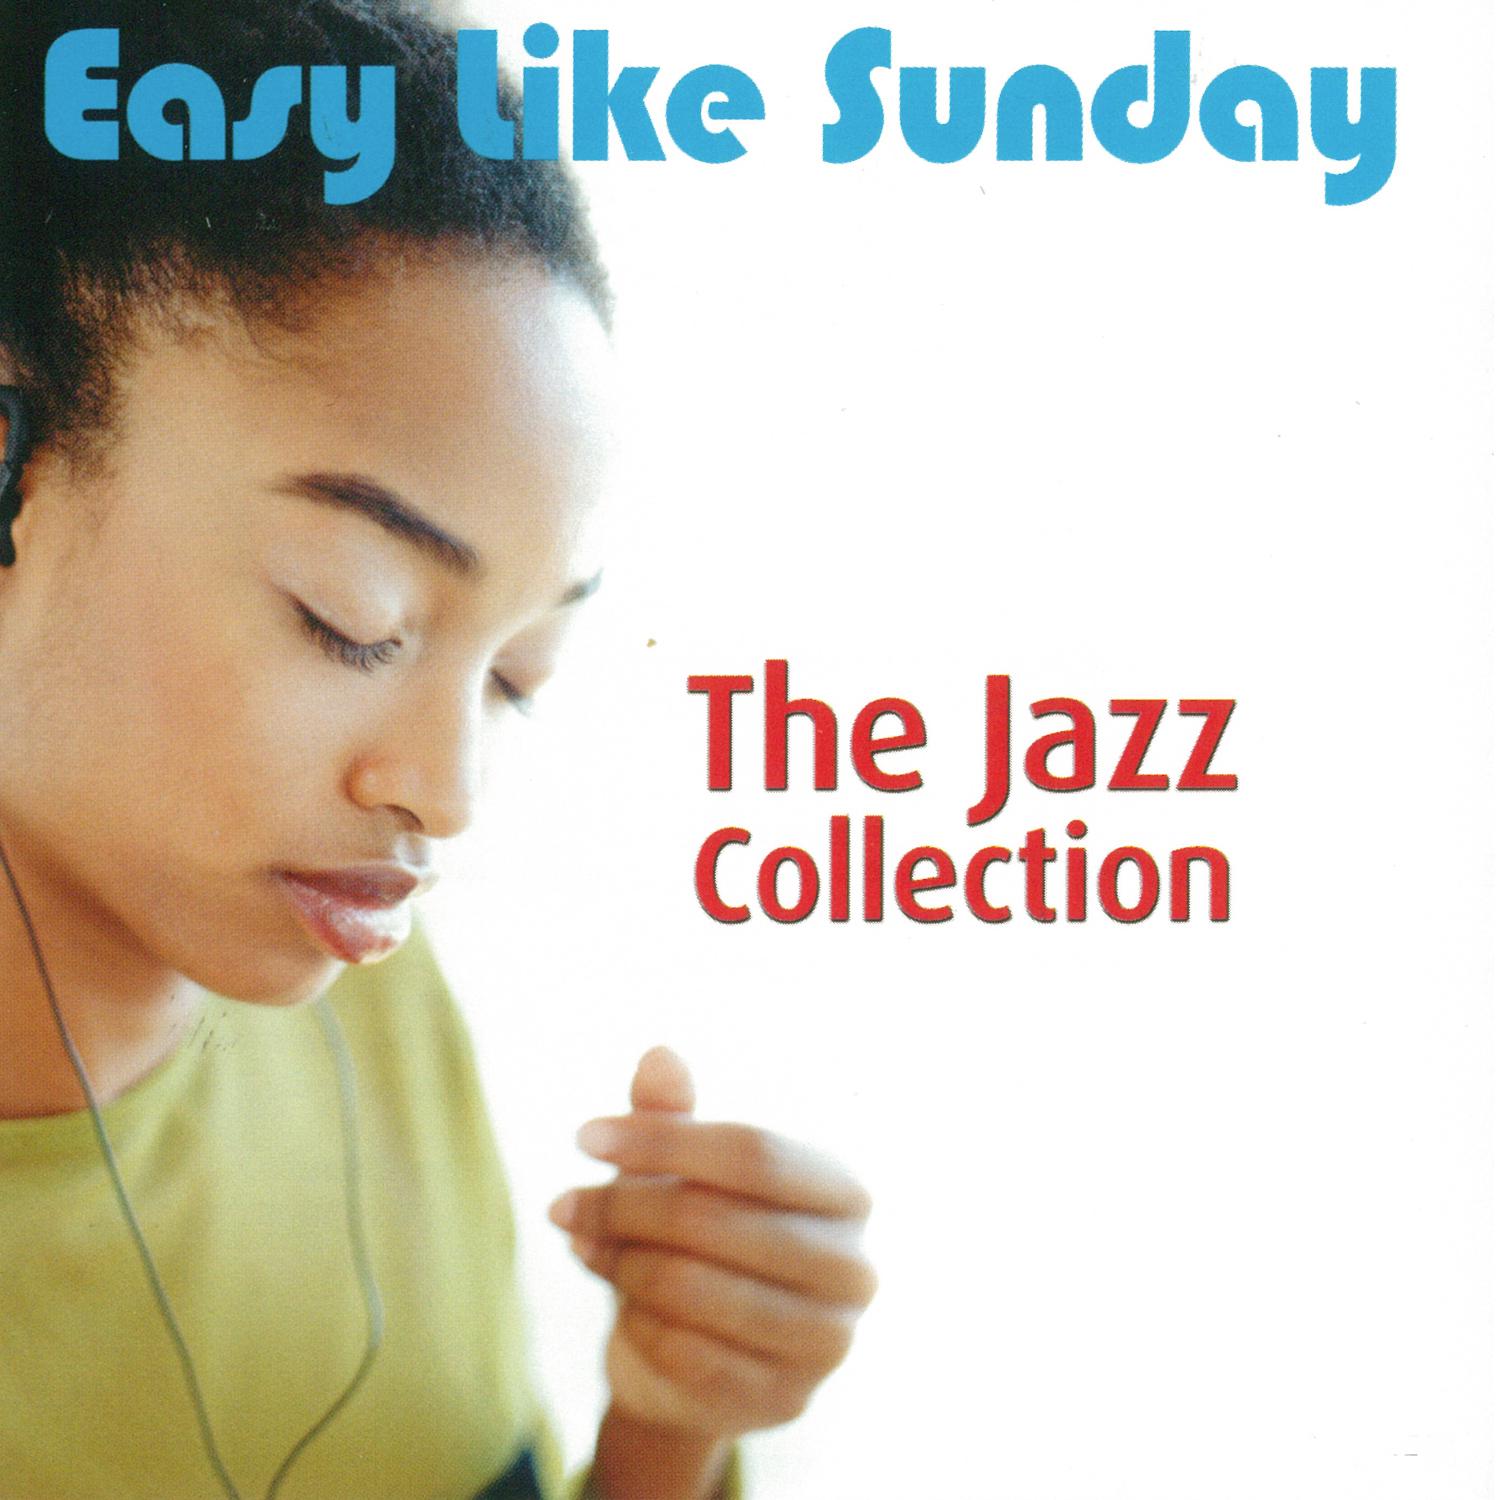 Easy Like Sunday, The Jazz Collection